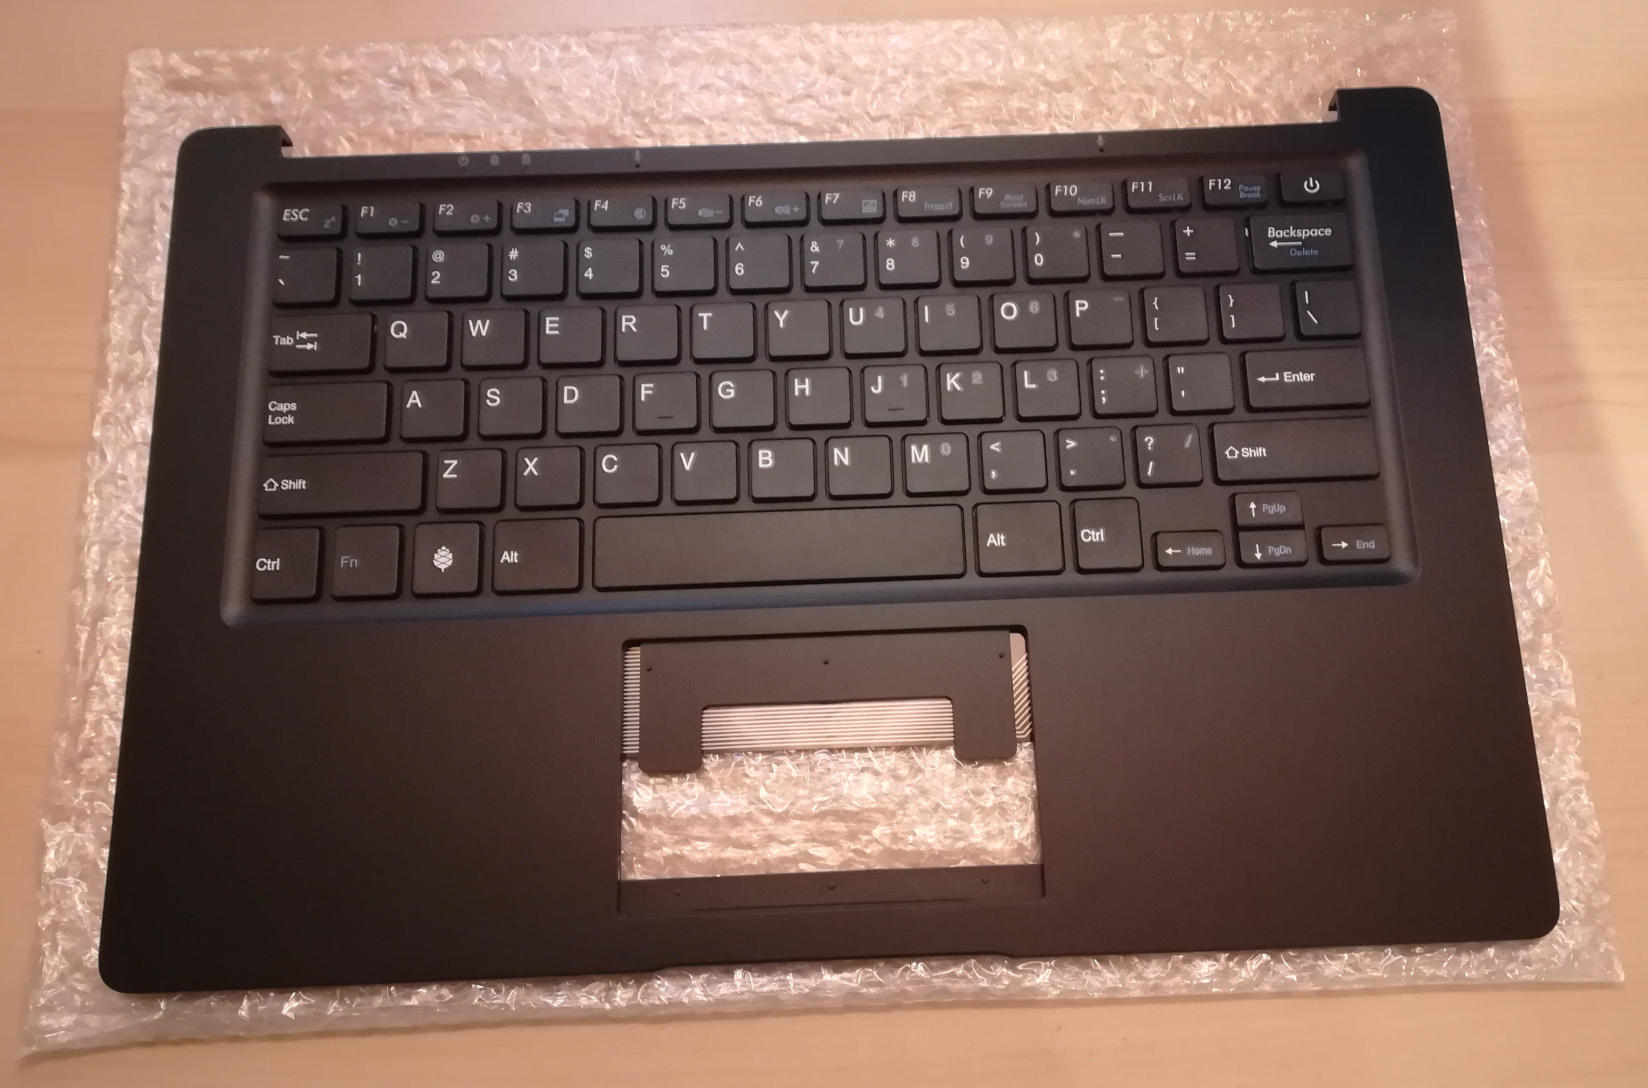 Replacement keyboard (back)